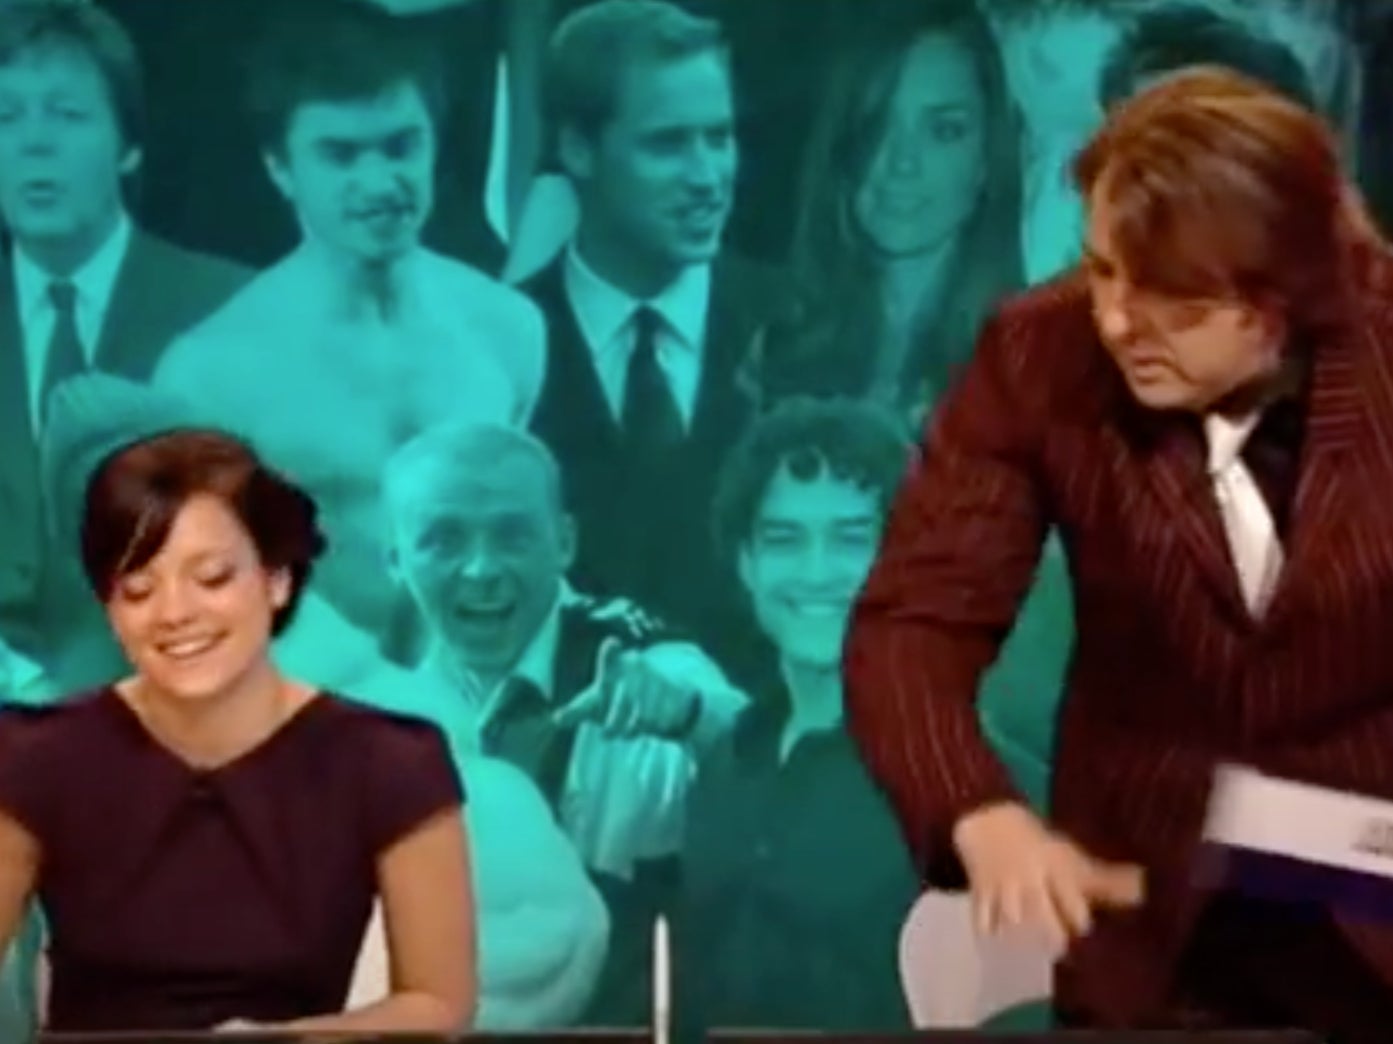 Lily Allen on ‘Big Fat Quiz of the year’ with Jonathan Ross